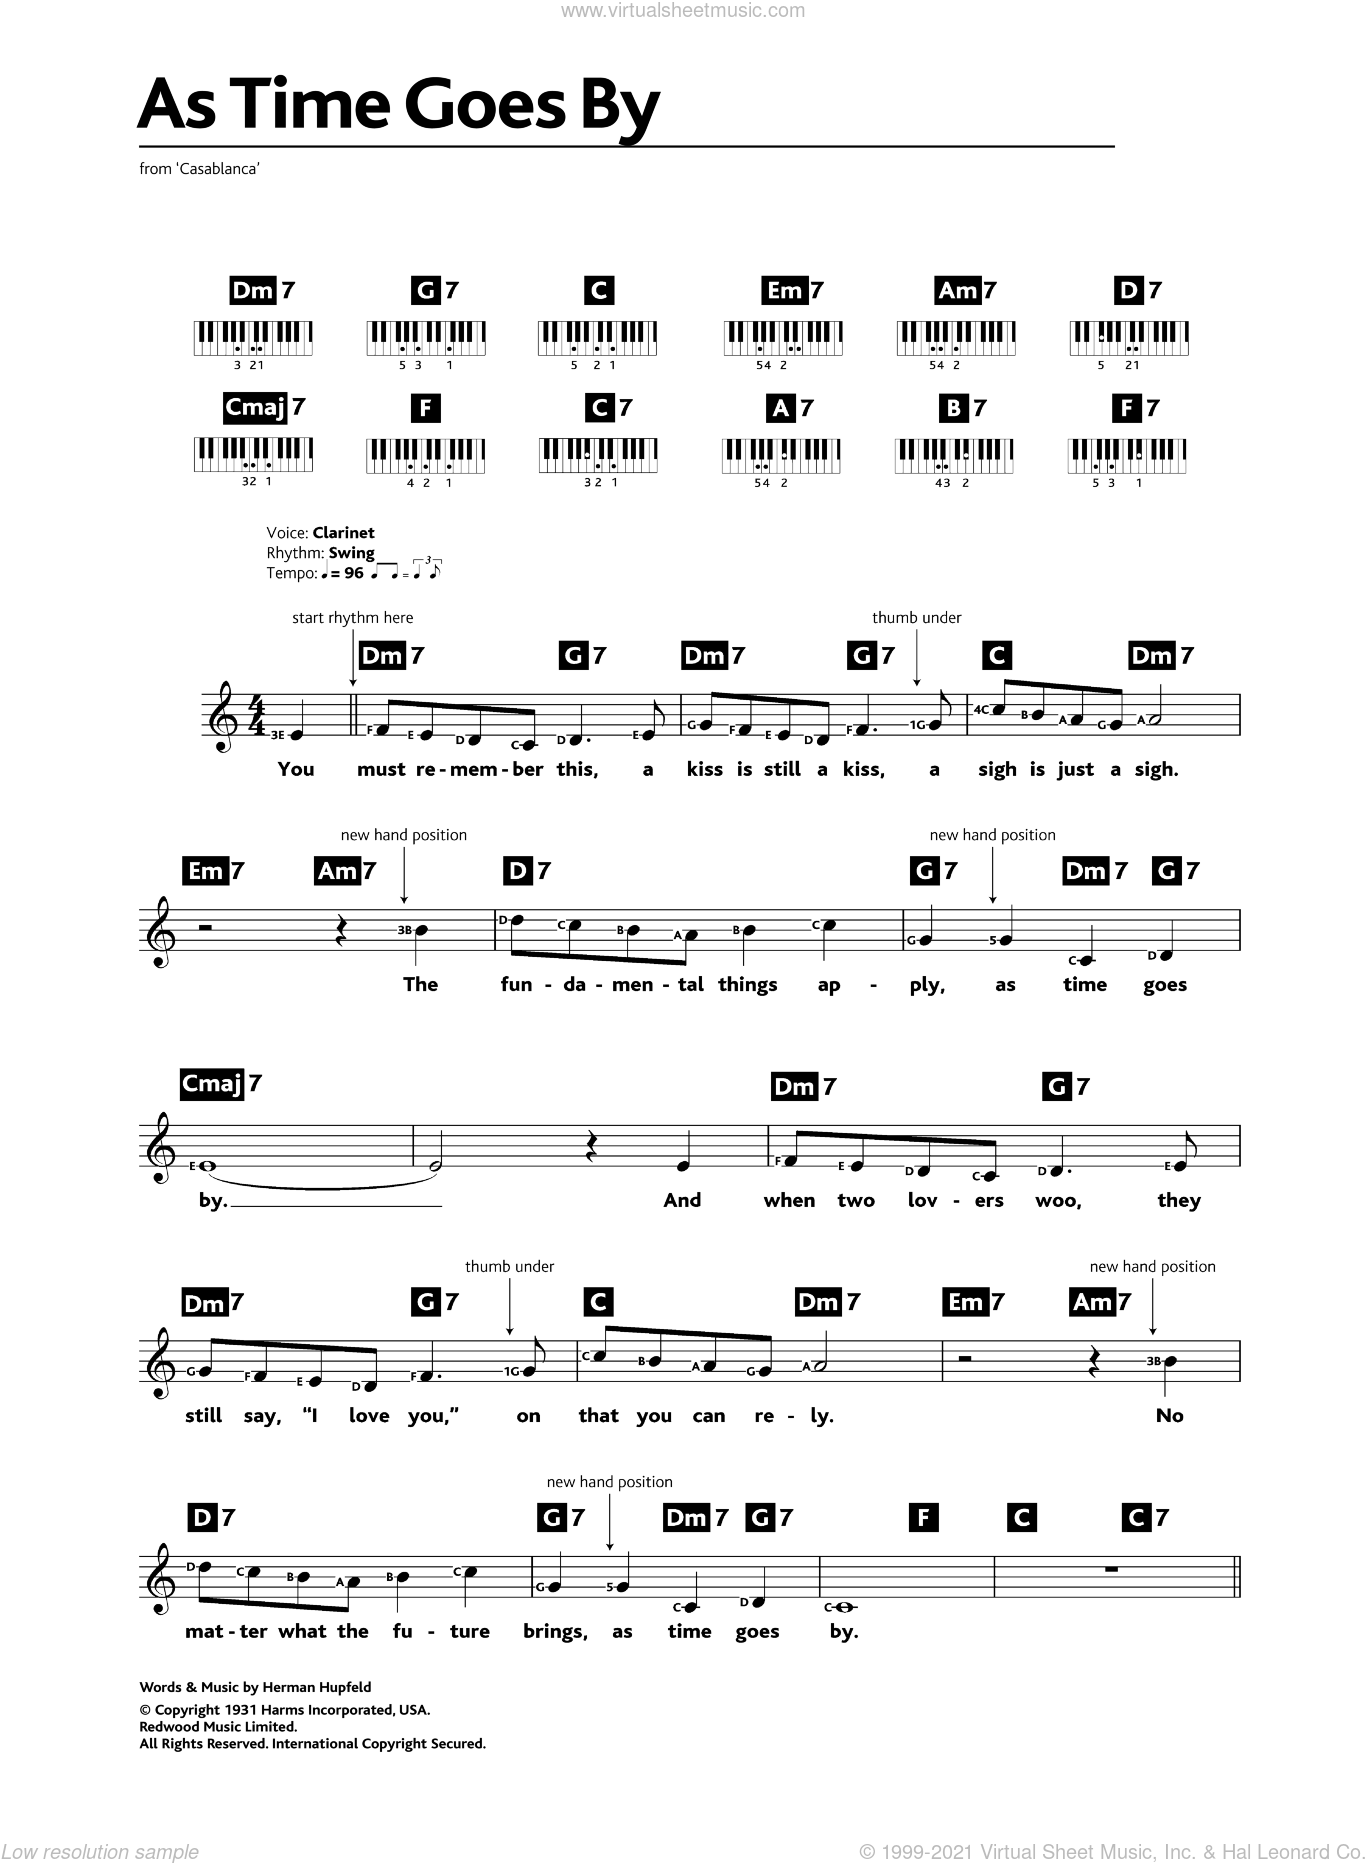 As Time Goes By sheet music (intermediate) for piano solo (chords